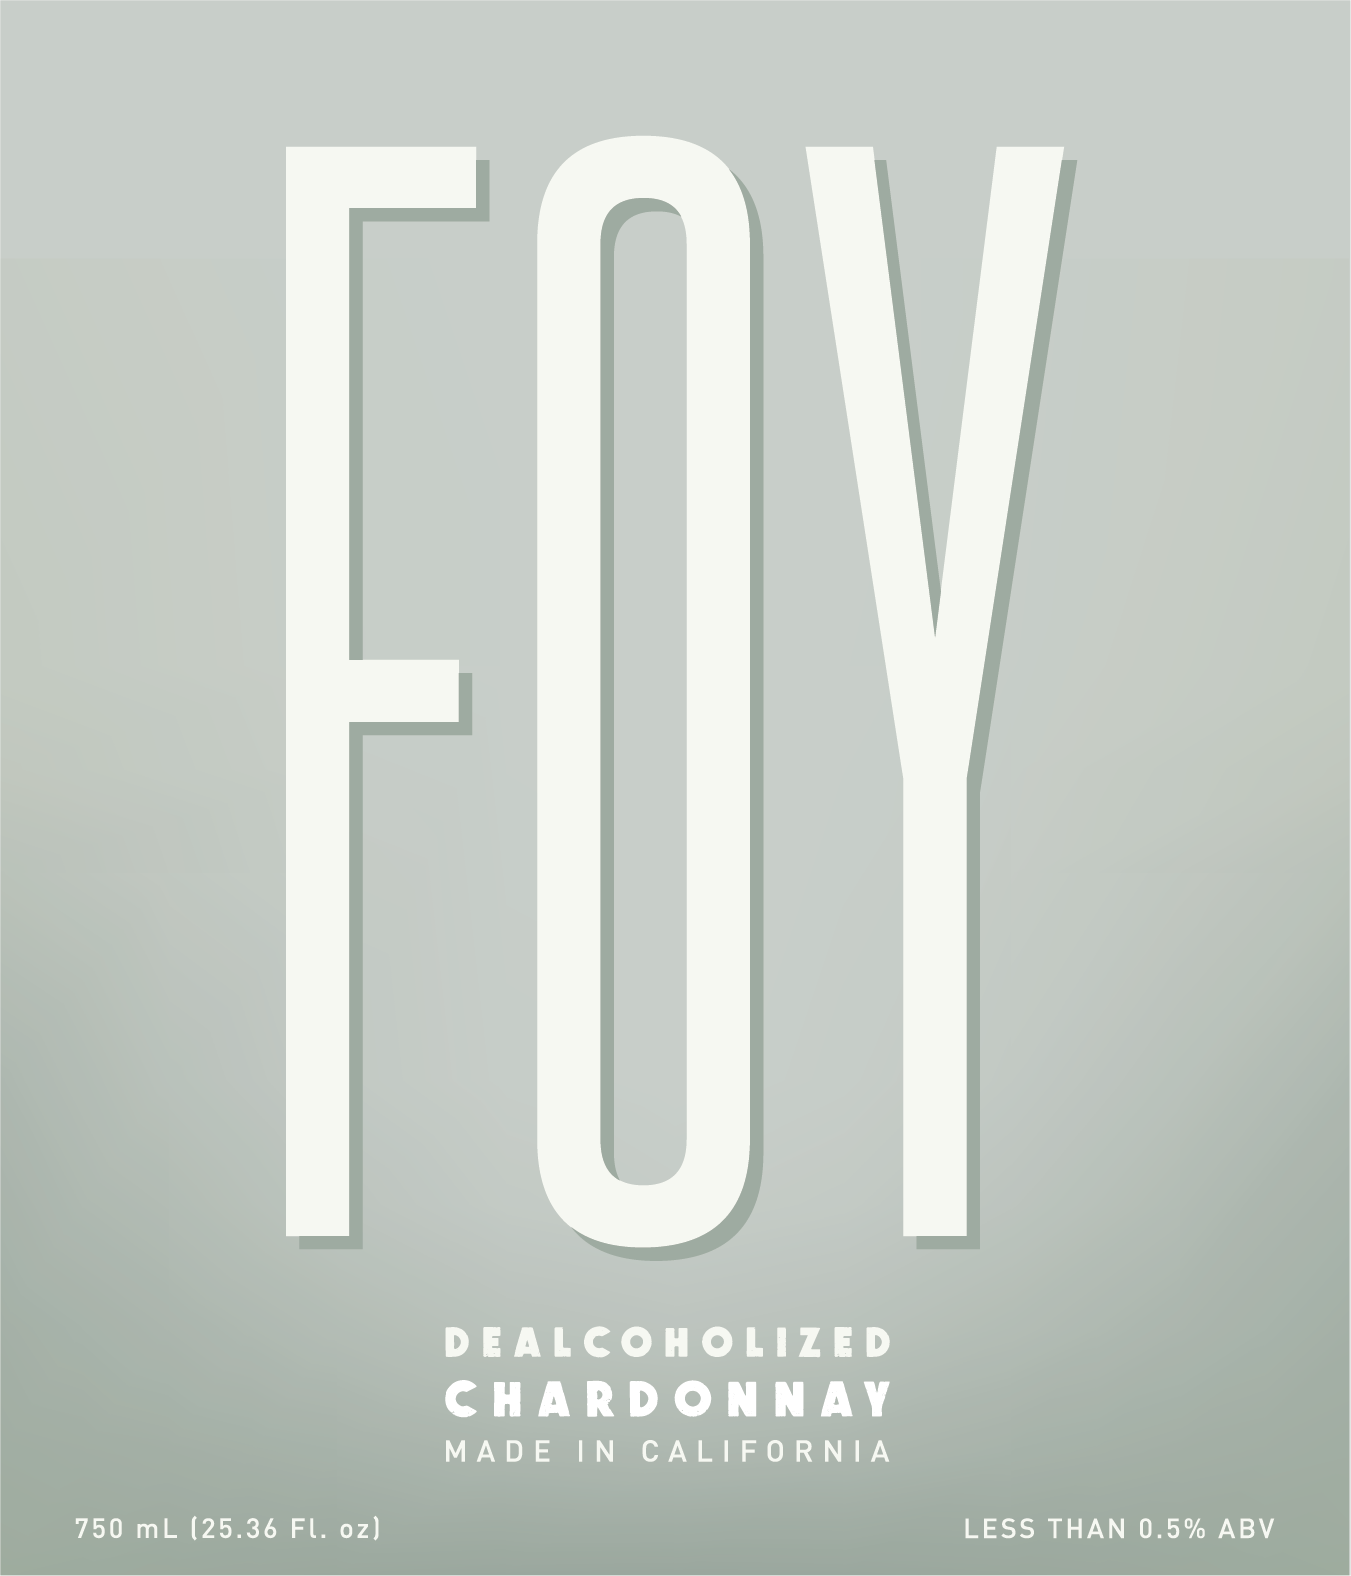 FOY dealcoholized Chardonnay made in California label